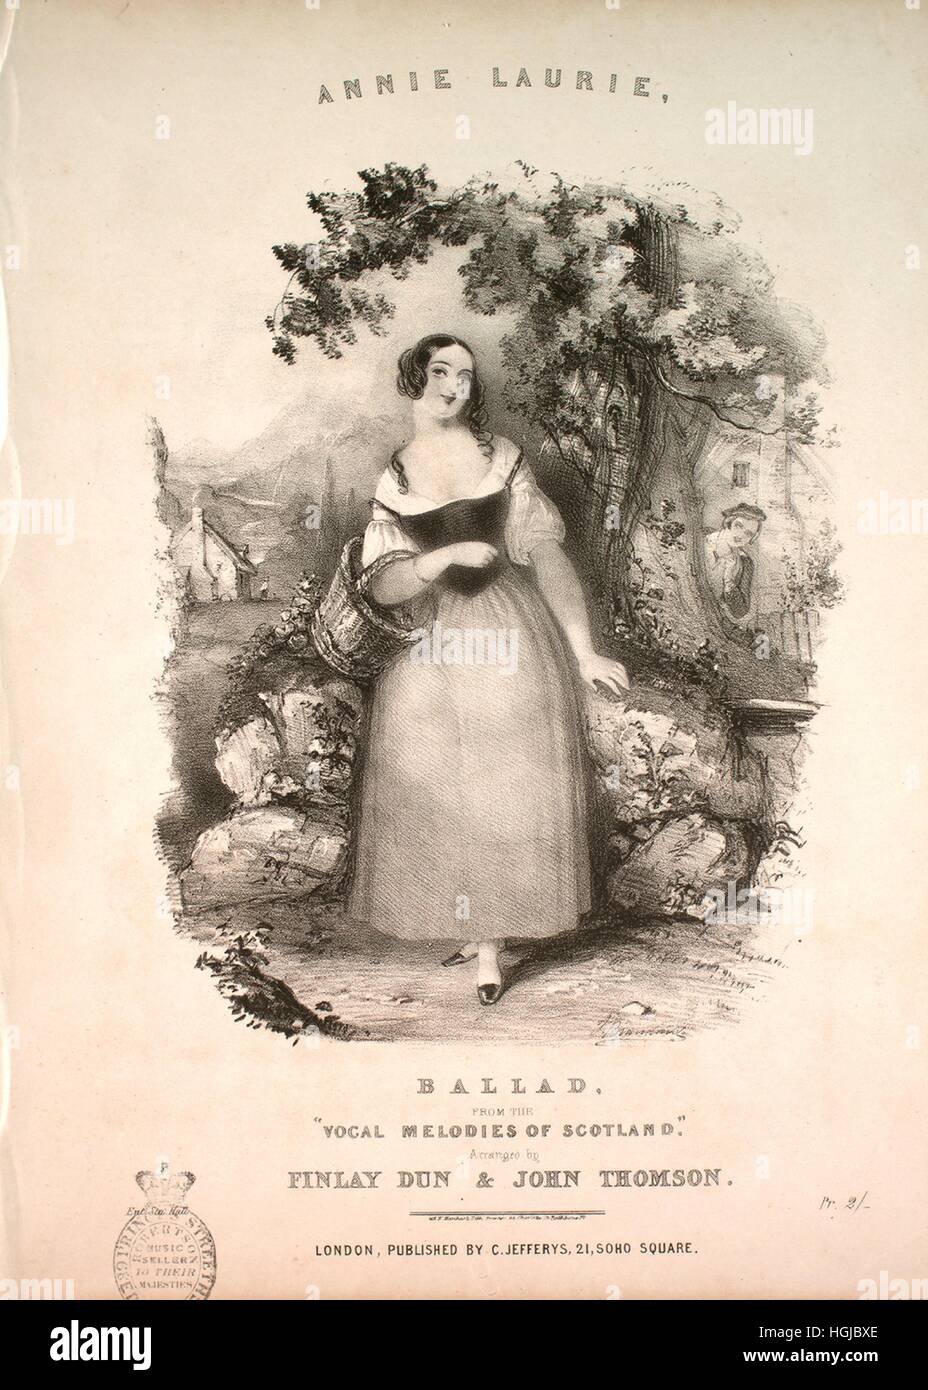 Sheet music cover image of the song 'Annie Laurie Ballad From the 'Vocal Melodies of Scotland'', with original authorship notes reading 'Arranged by Finlay Dun and John Thomson', United Kingdom, 1900. The publisher is listed as 'C. Jefferys, 21 Soho Square', the form of composition is 'strophic', the instrumentation is 'piano and voice', the first line reads 'Maxwellton braes are bonnie, where early fa's the dew', and the illustration artist is listed as 'M. and N. Hanhart Lith. Printer 64 Charlotte St. Rathbone Pl.; J. Brandard, del.'. Stock Photo